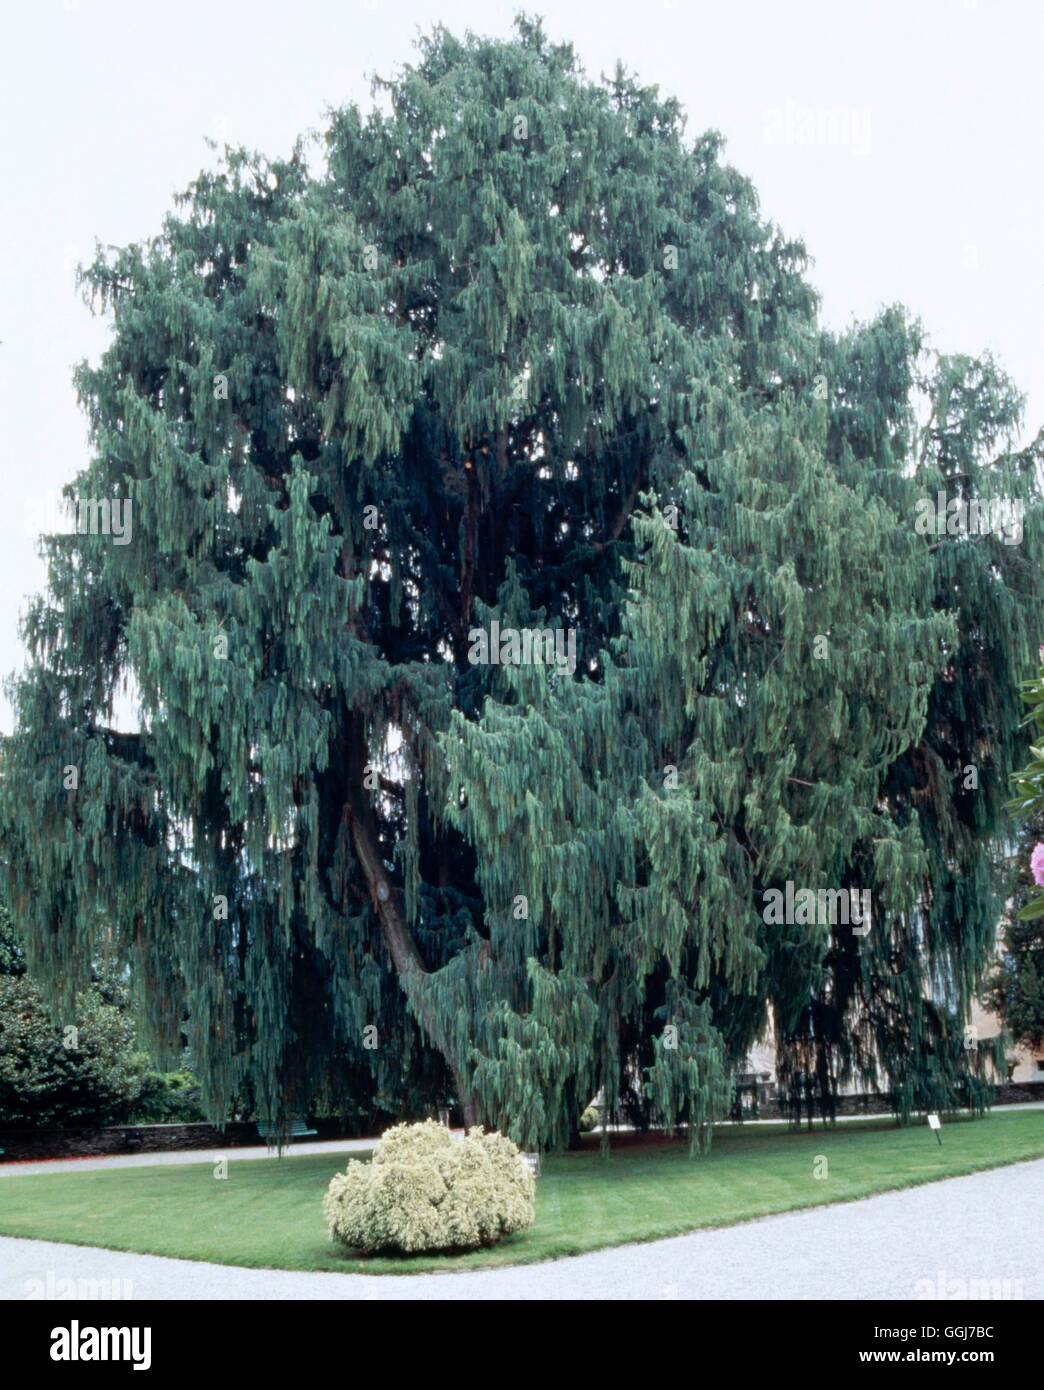 Cupressus cashmeriana AGM - The famous specimen of the Kashmir Cypress growing on Isola Madre'''   CON056958  Compul' Stock Photo